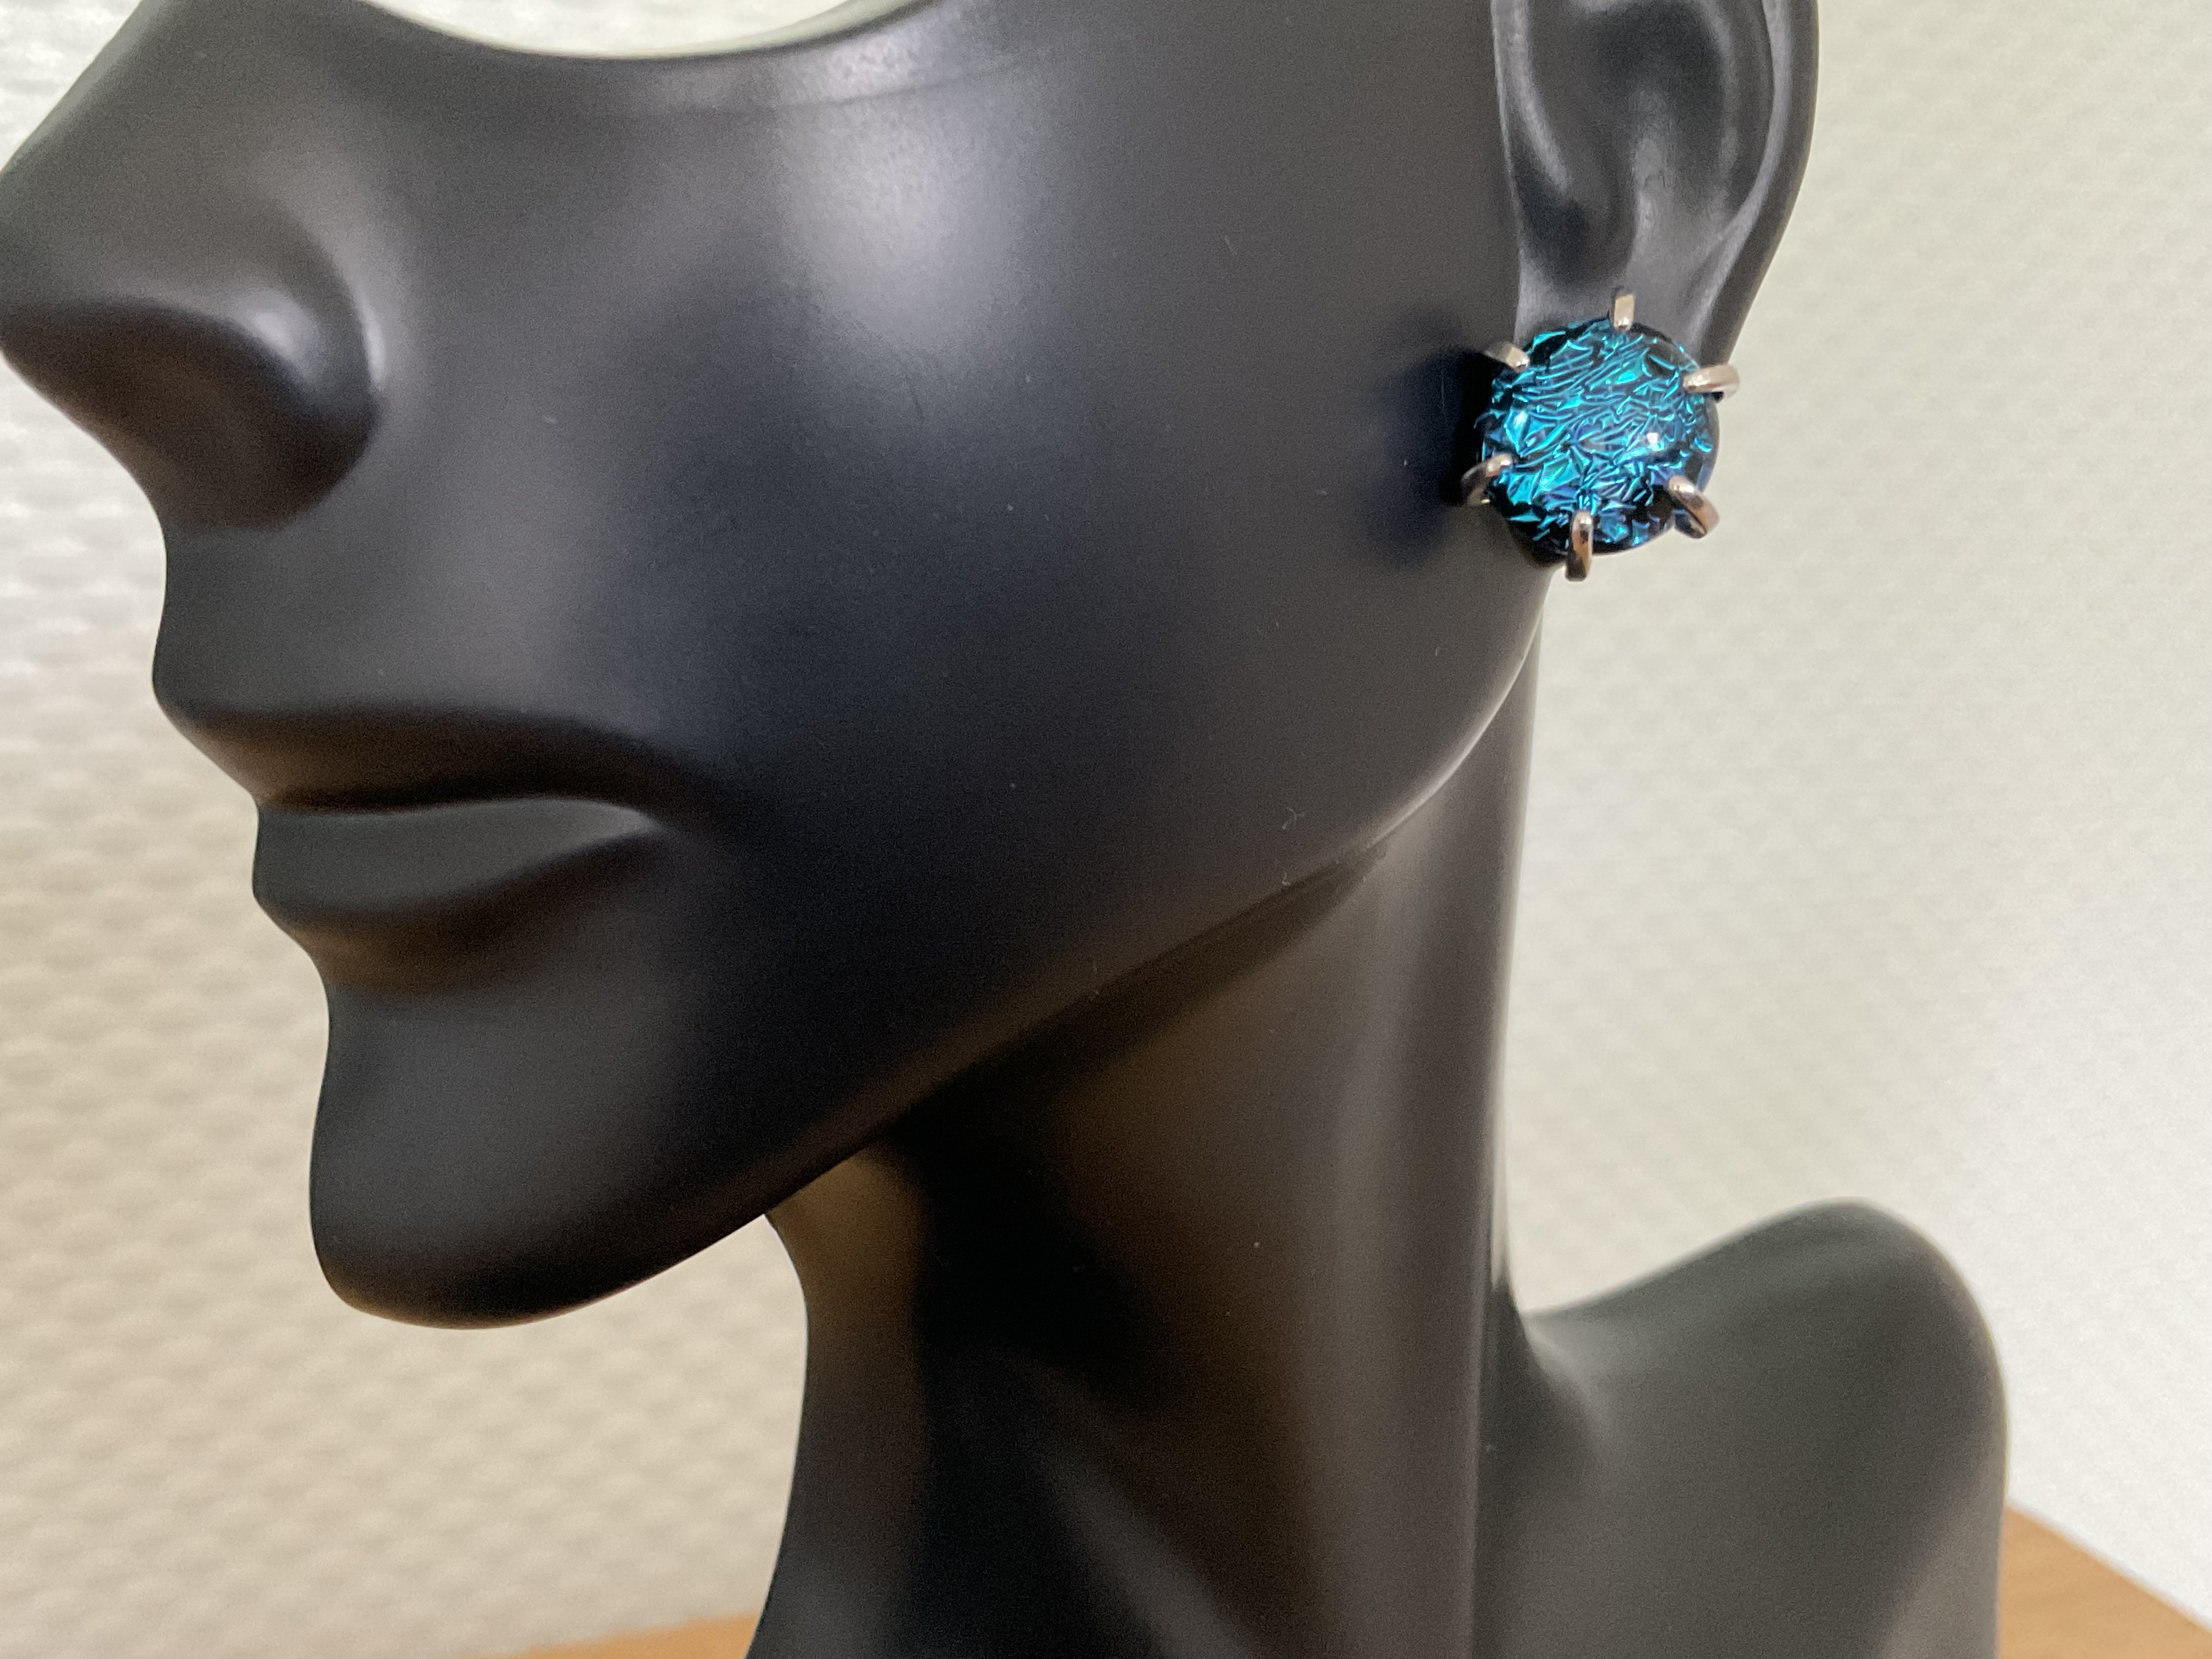 Blue Cracklized Dichroic Fused Glass Stud Earrings